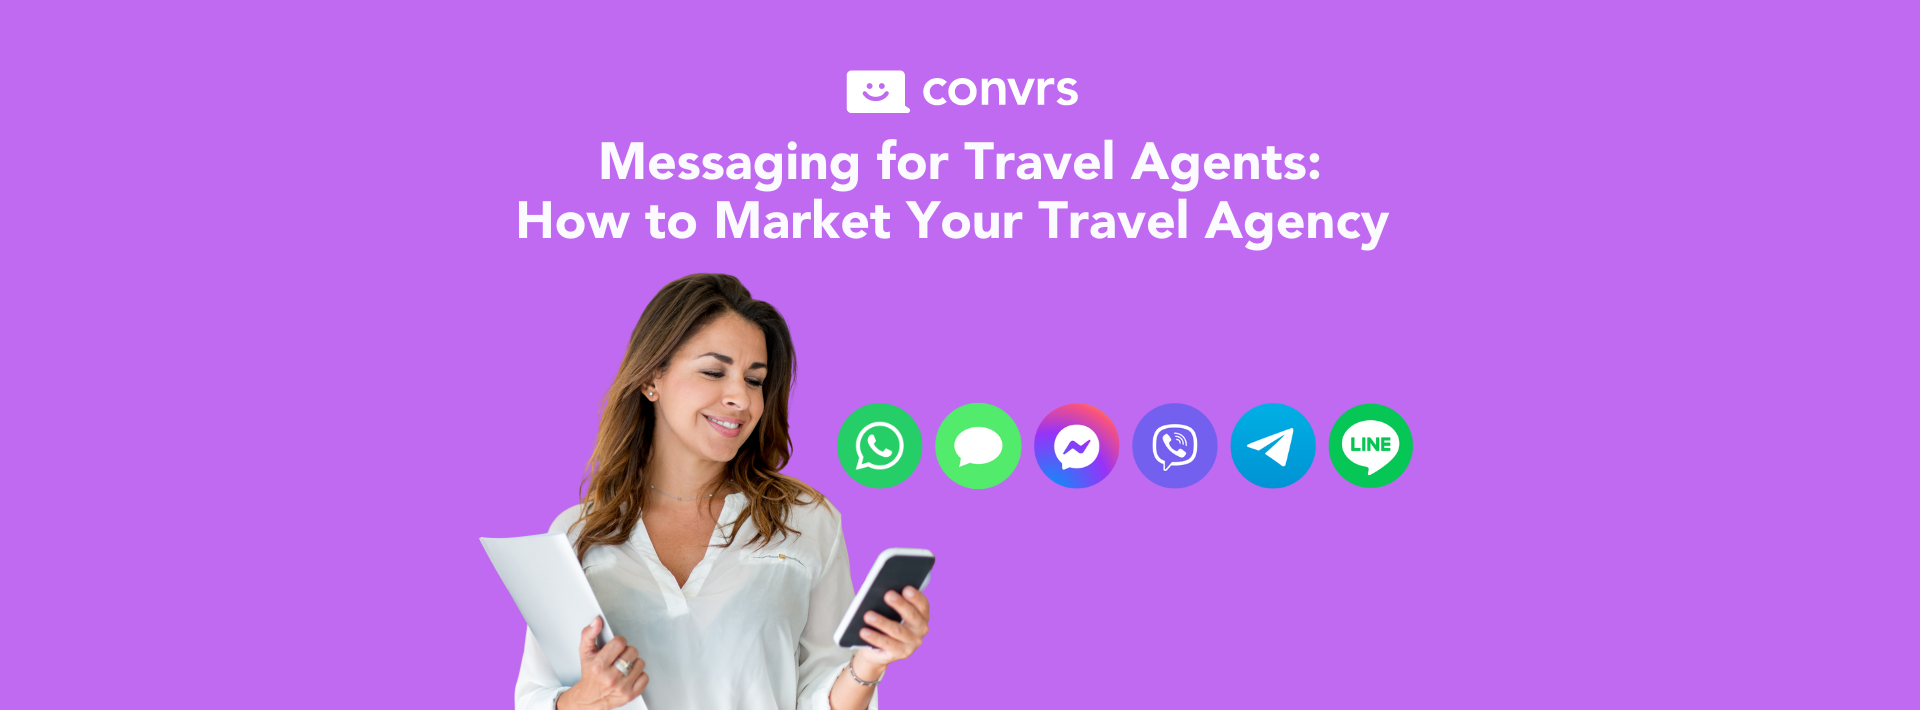 Travel agent using messaging apps for customer communication